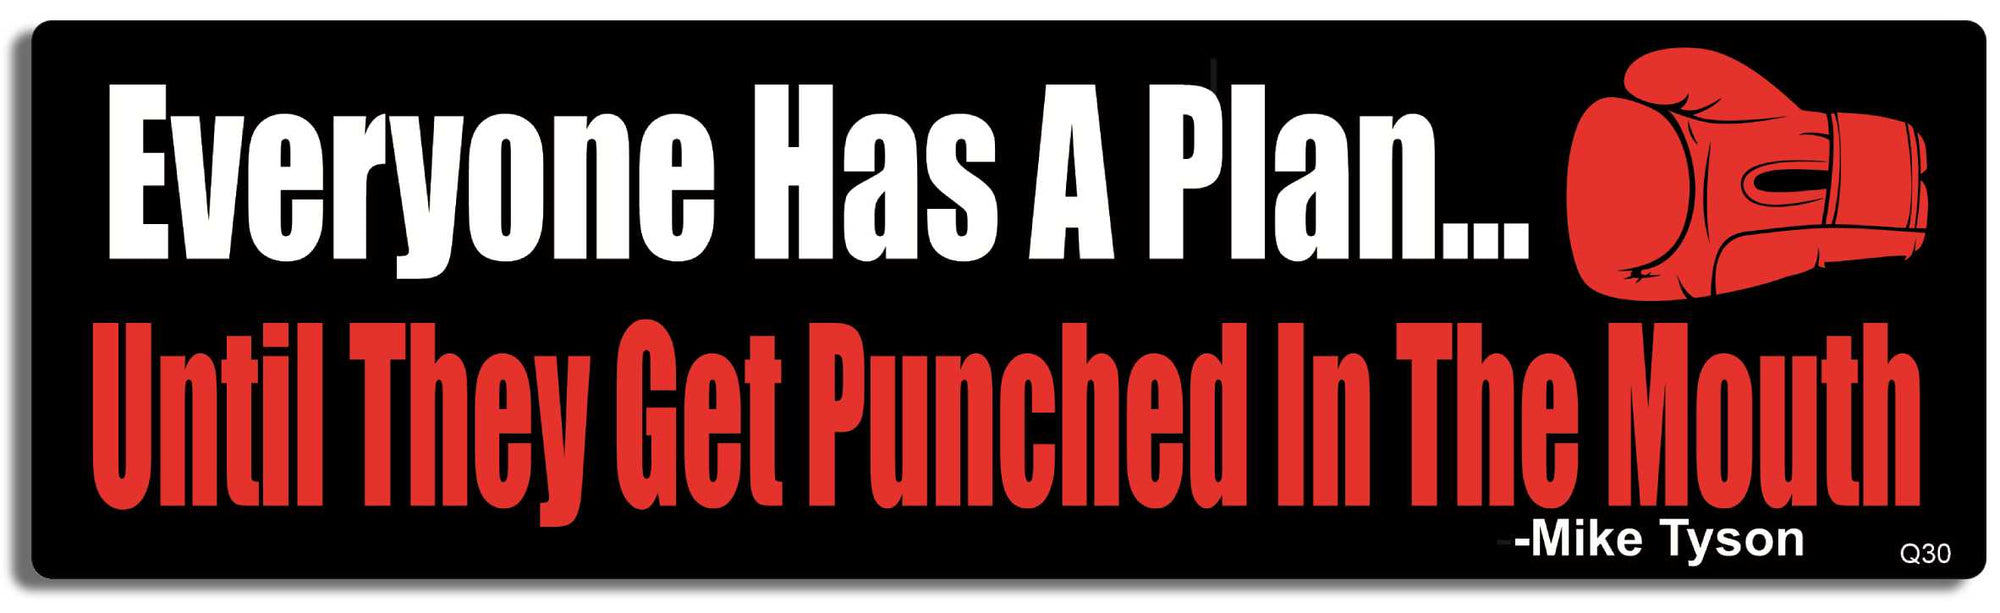 Everyone Has A Plan... Until They Get Punched In The Mouth - Mike Tyson - 3" x 10" -  Decal Bumper Sticker-quotation Bumper Sticker Car Magnet Everyone Has A Plan... Until They-  Decal for carsquotation, quote